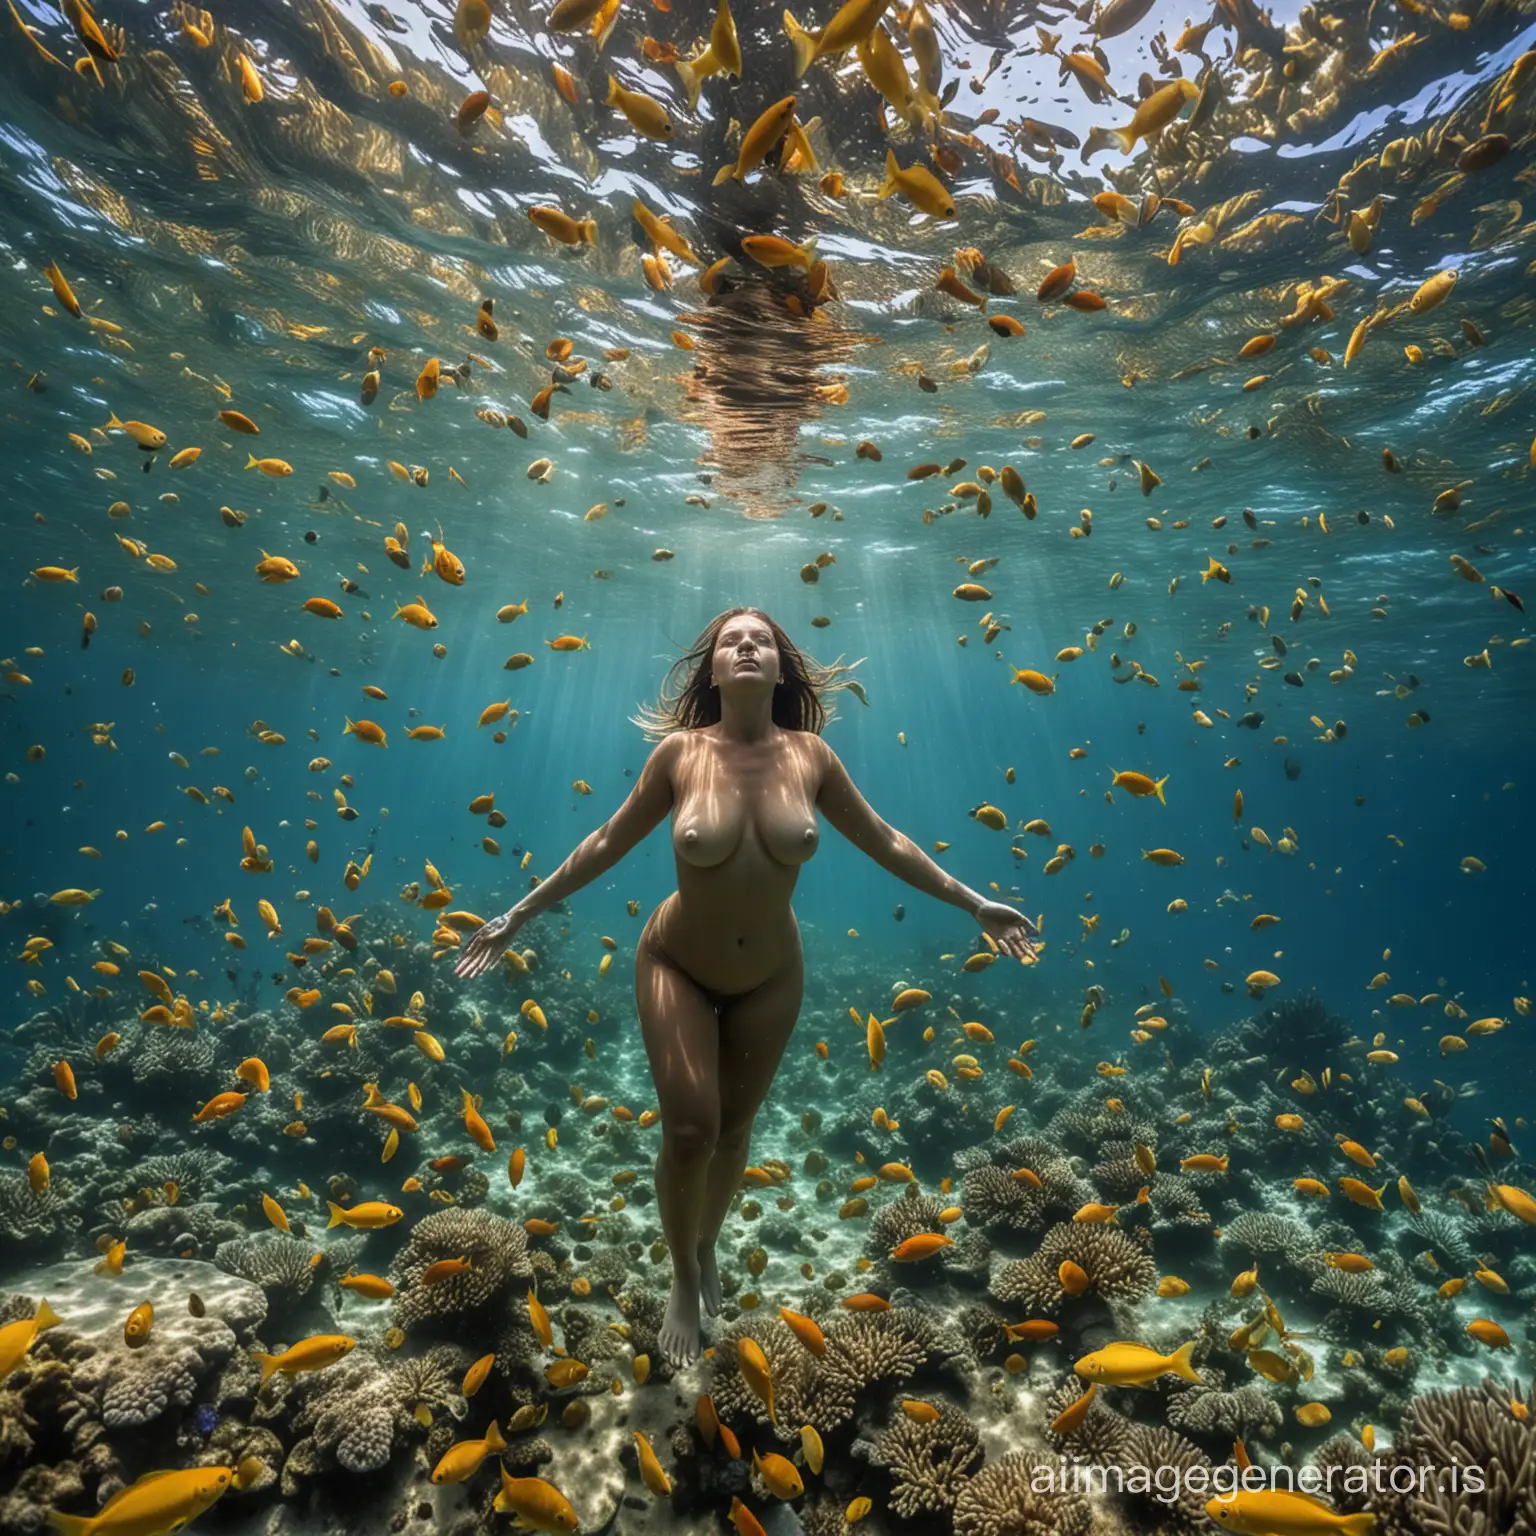 Plump-Nude-Swimmer-Surrounded-by-Colorful-Fish-in-Indian-Ocean